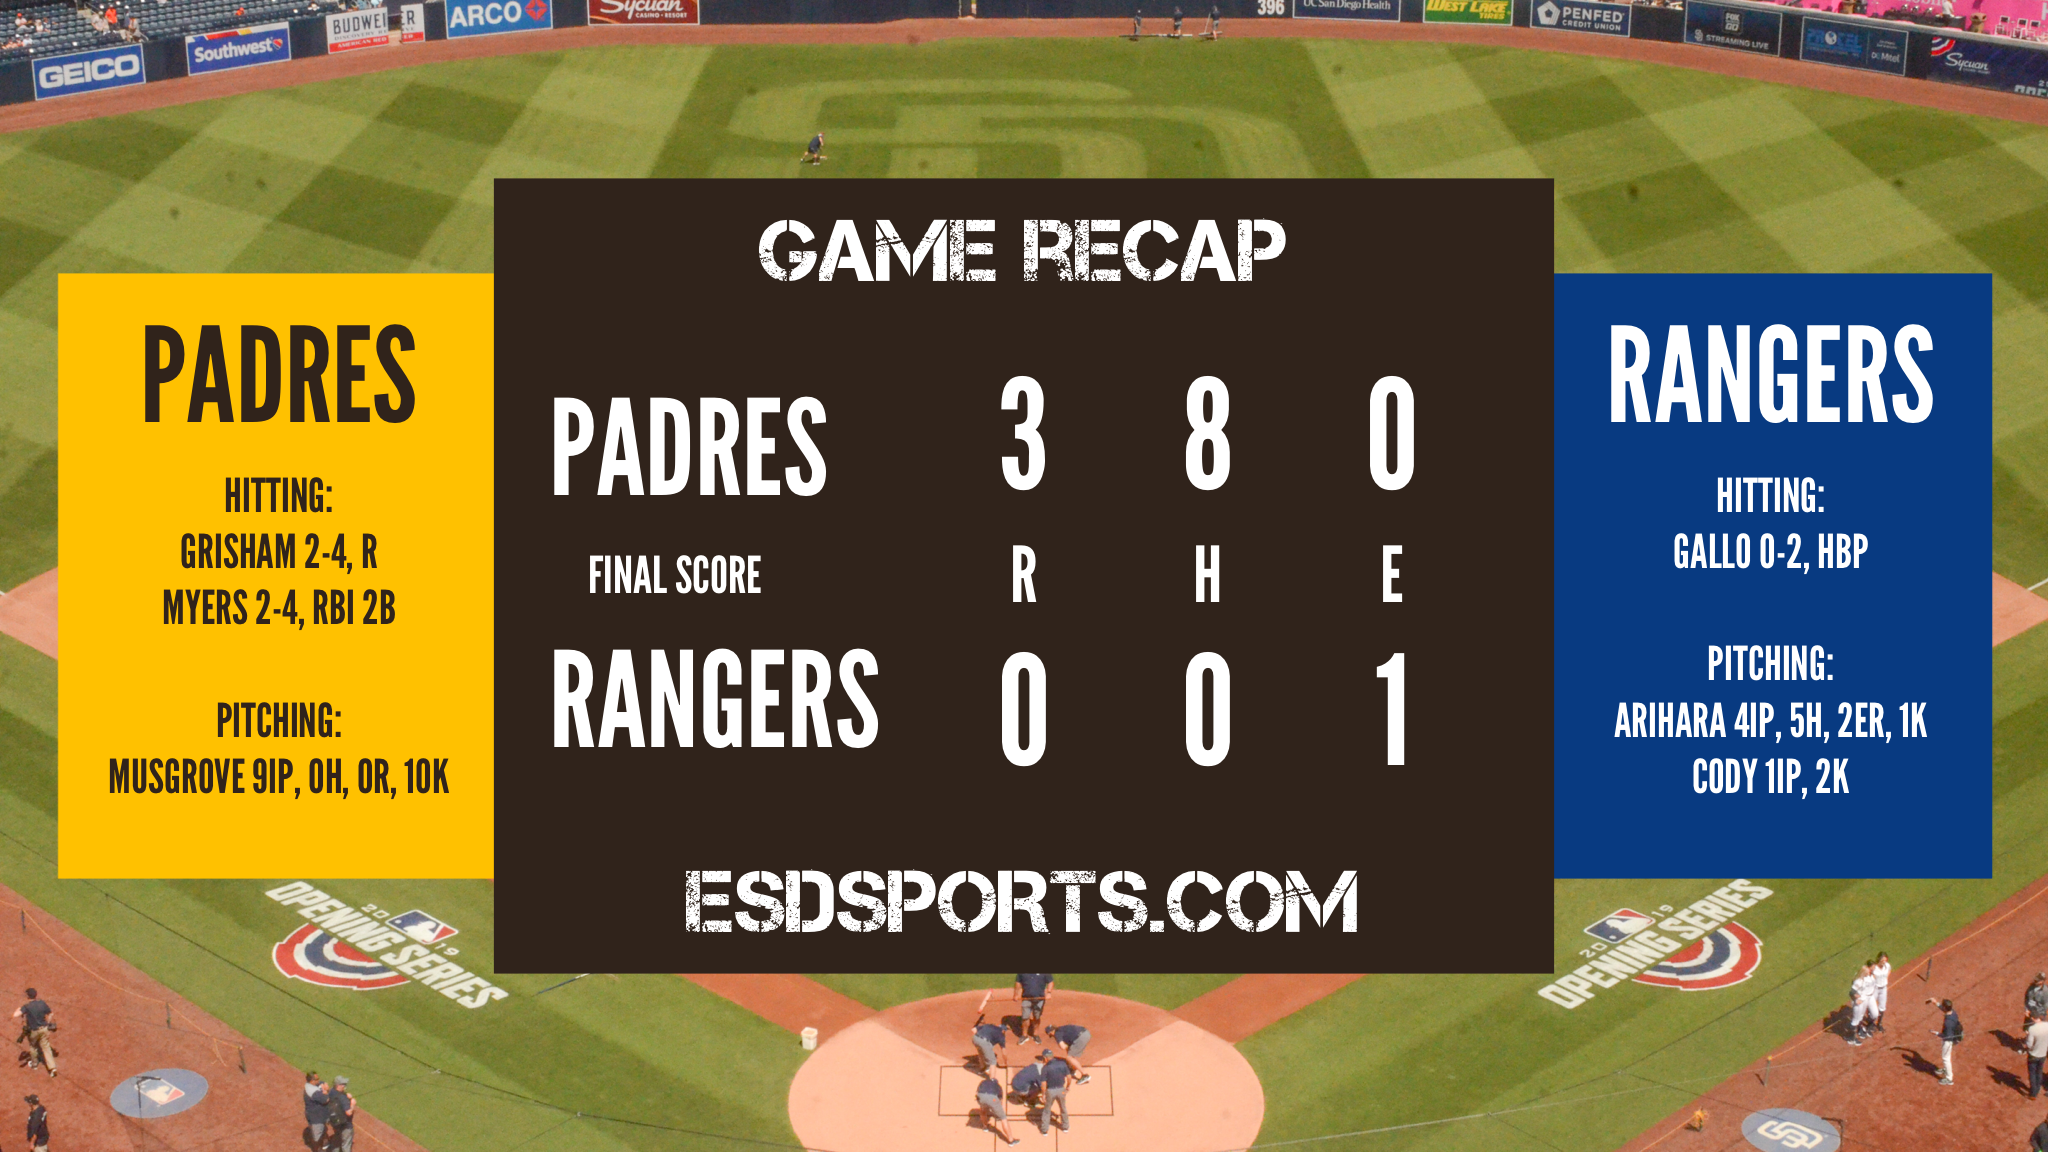 Padres defeat the Rangers, 3-0.